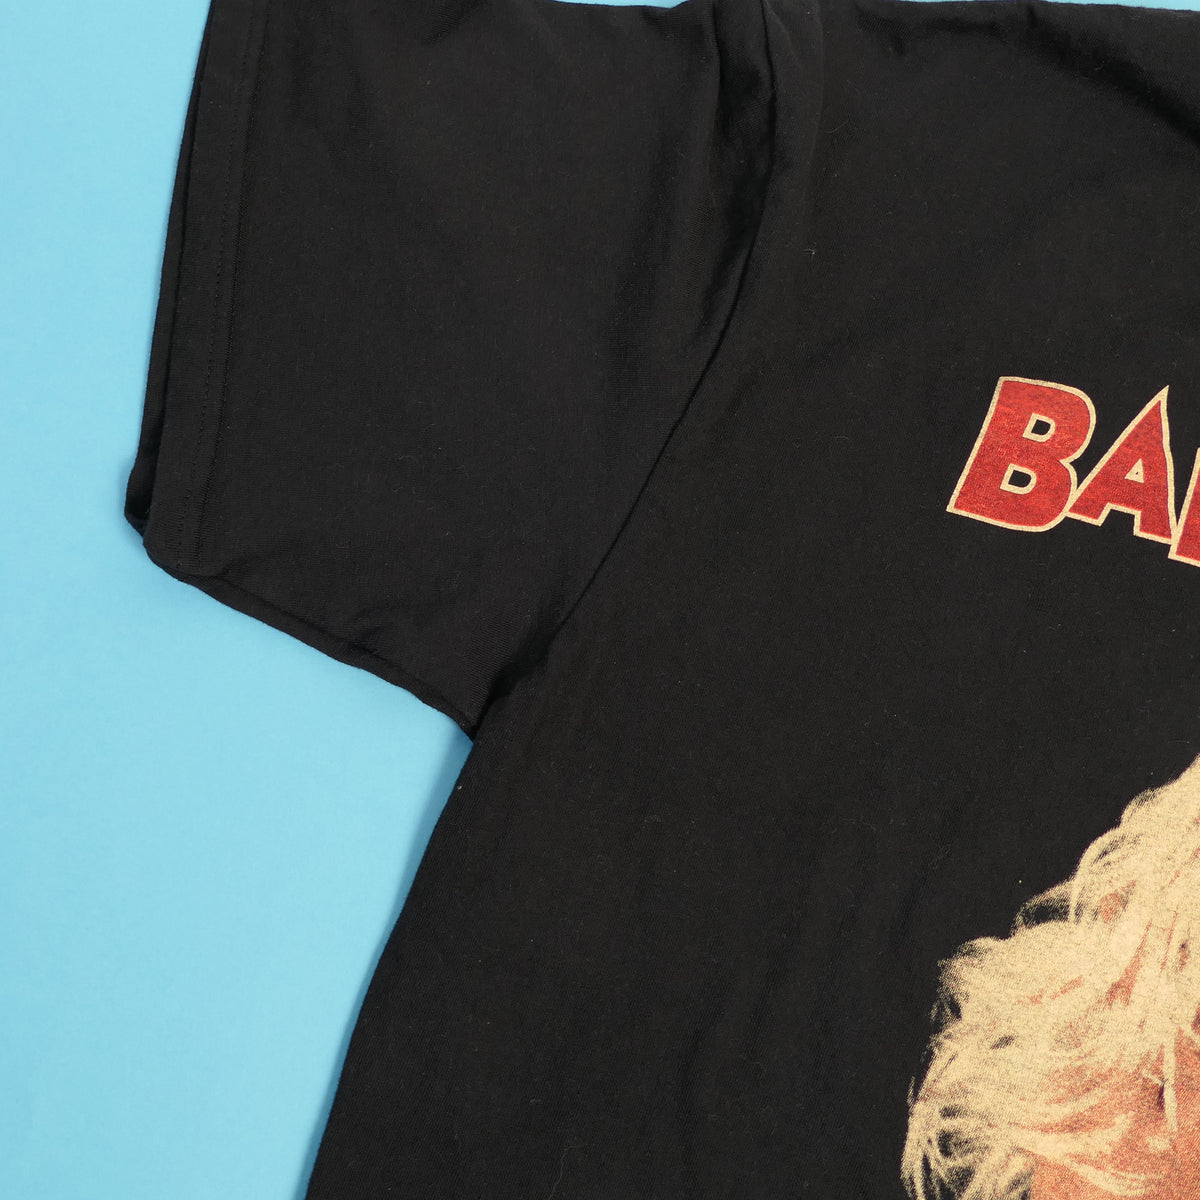 Barb Wire Tee